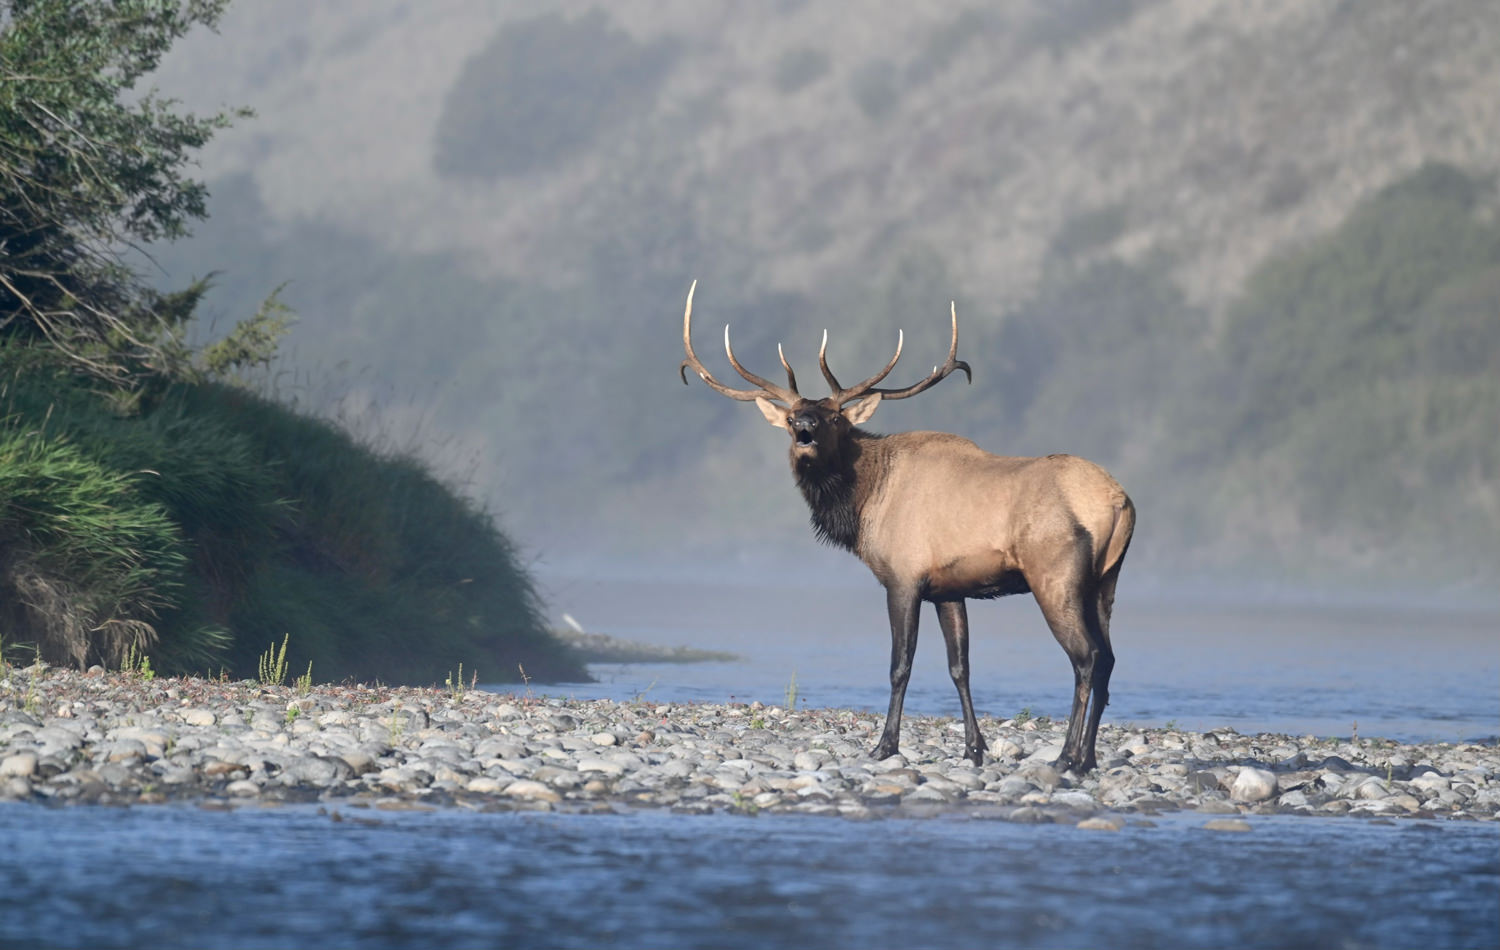 Mt Trout Co Scenic Floats - large elk in river